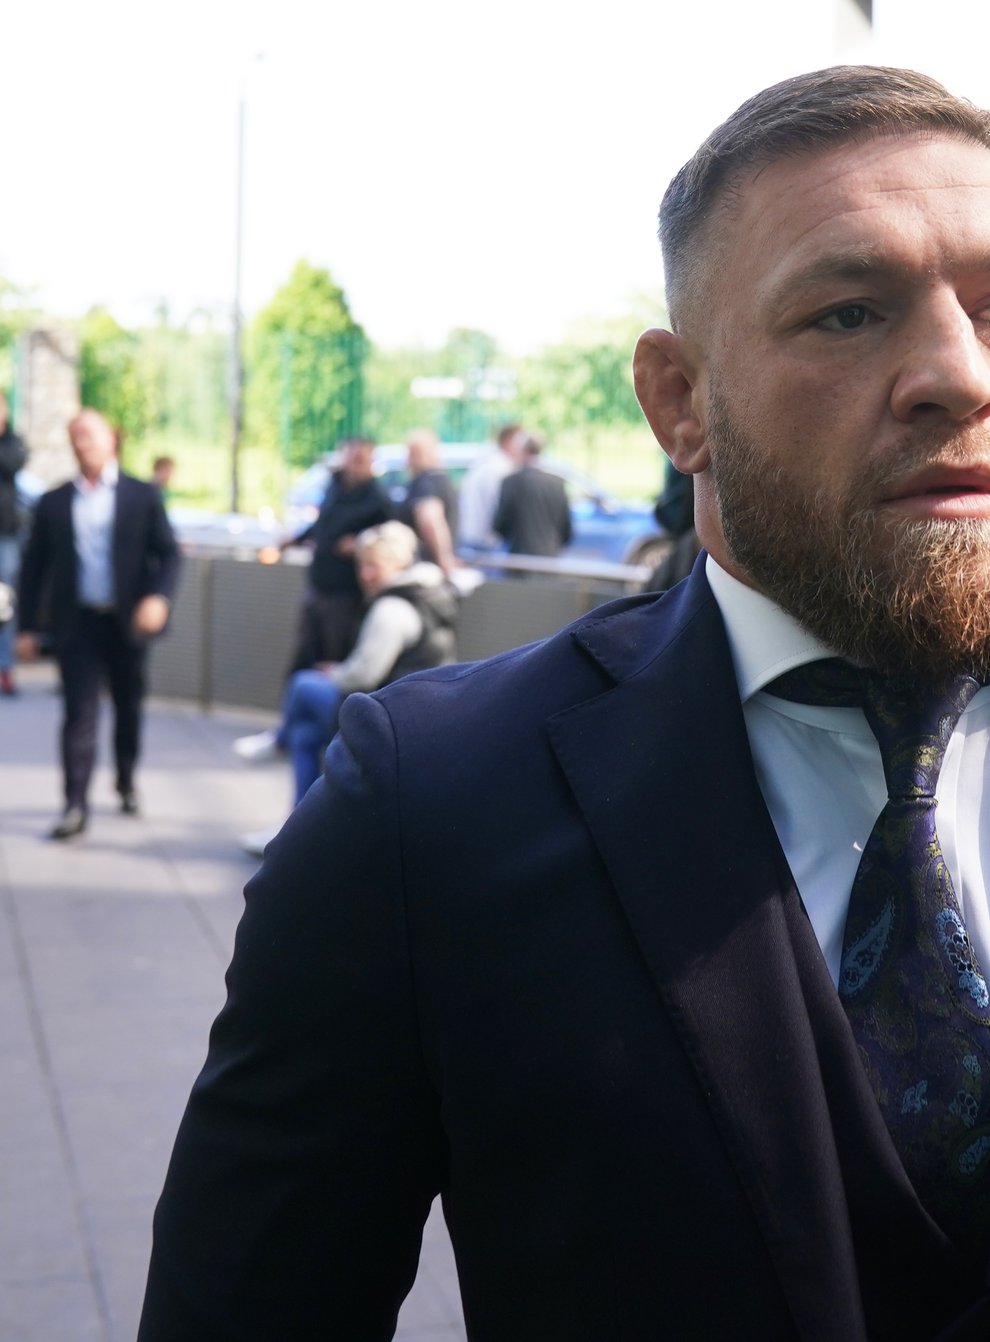 Conor McGregor arriving at Blanchardstown Court, Dublin on Thursday. (Brian Lawless/PA)